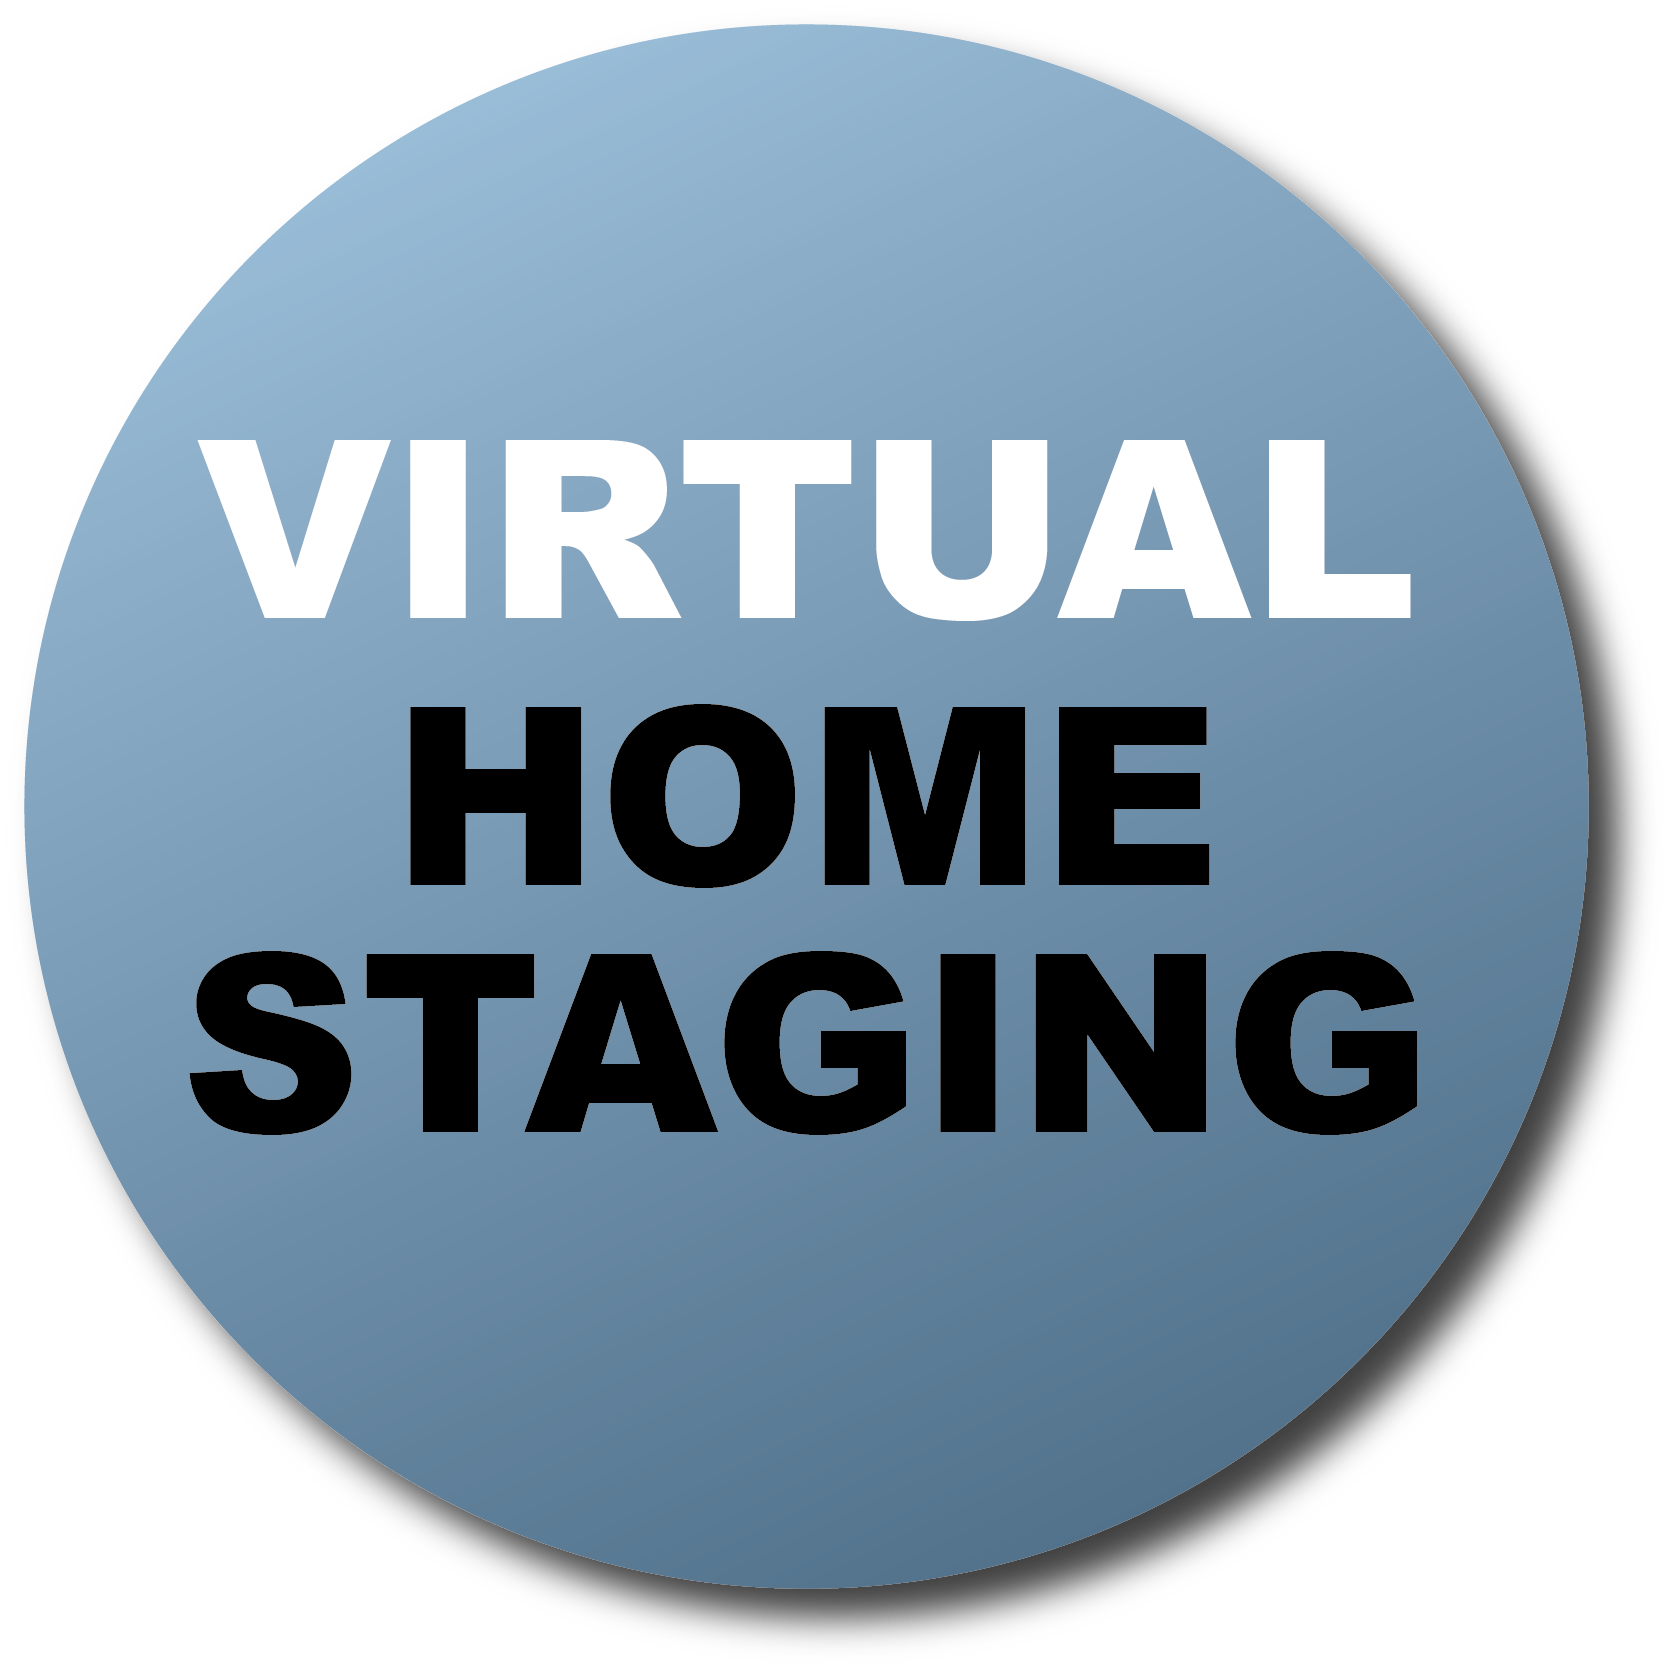 Home Staging Virtuel